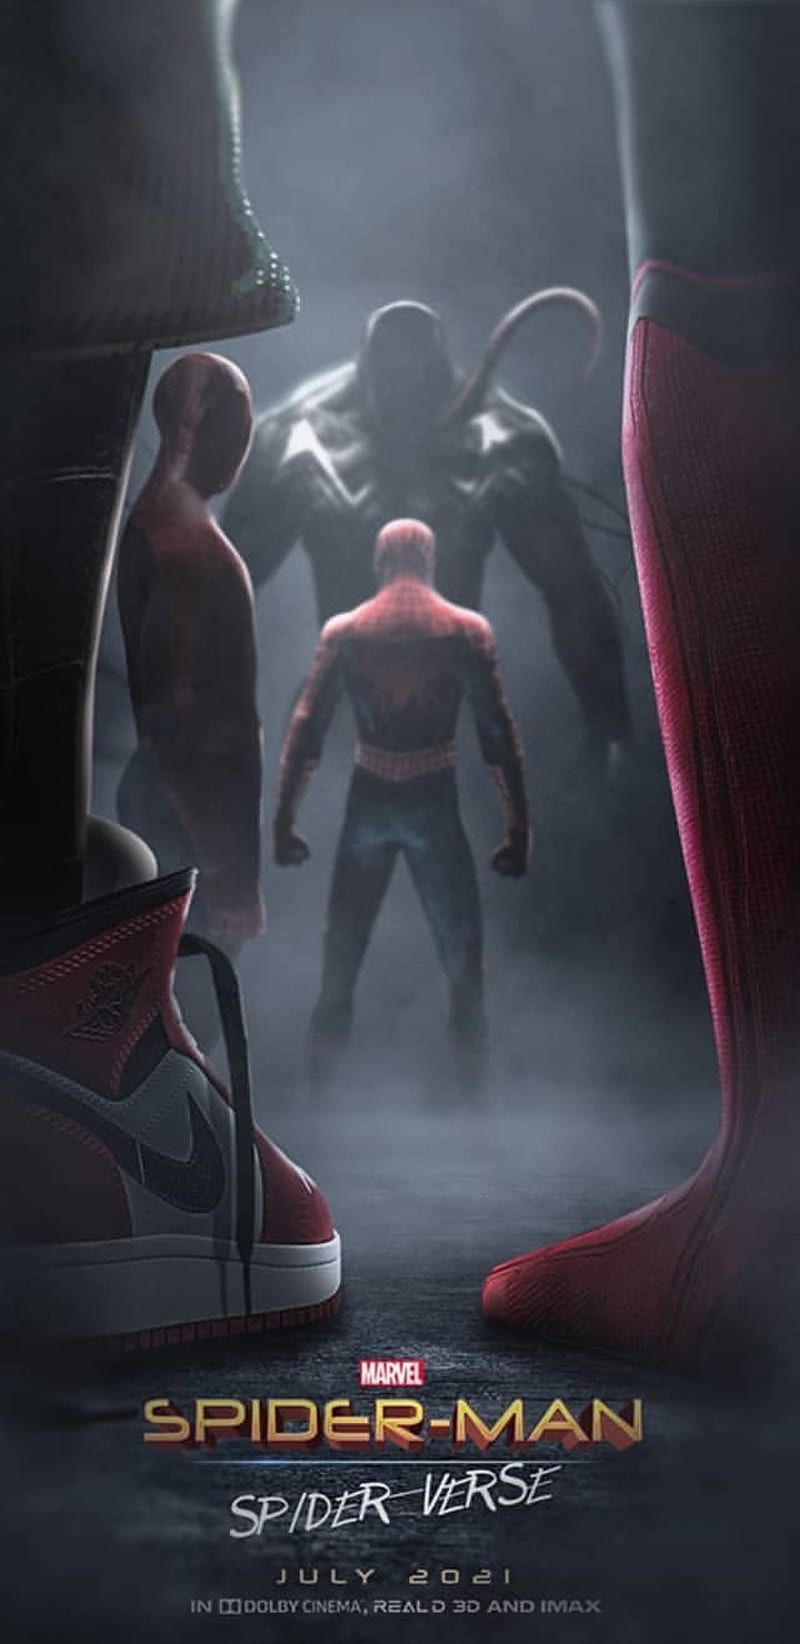 A poster for Spider-Man: Spider-Verse showing a shoe, a spider and a figure in the background. - Andrew Garfield